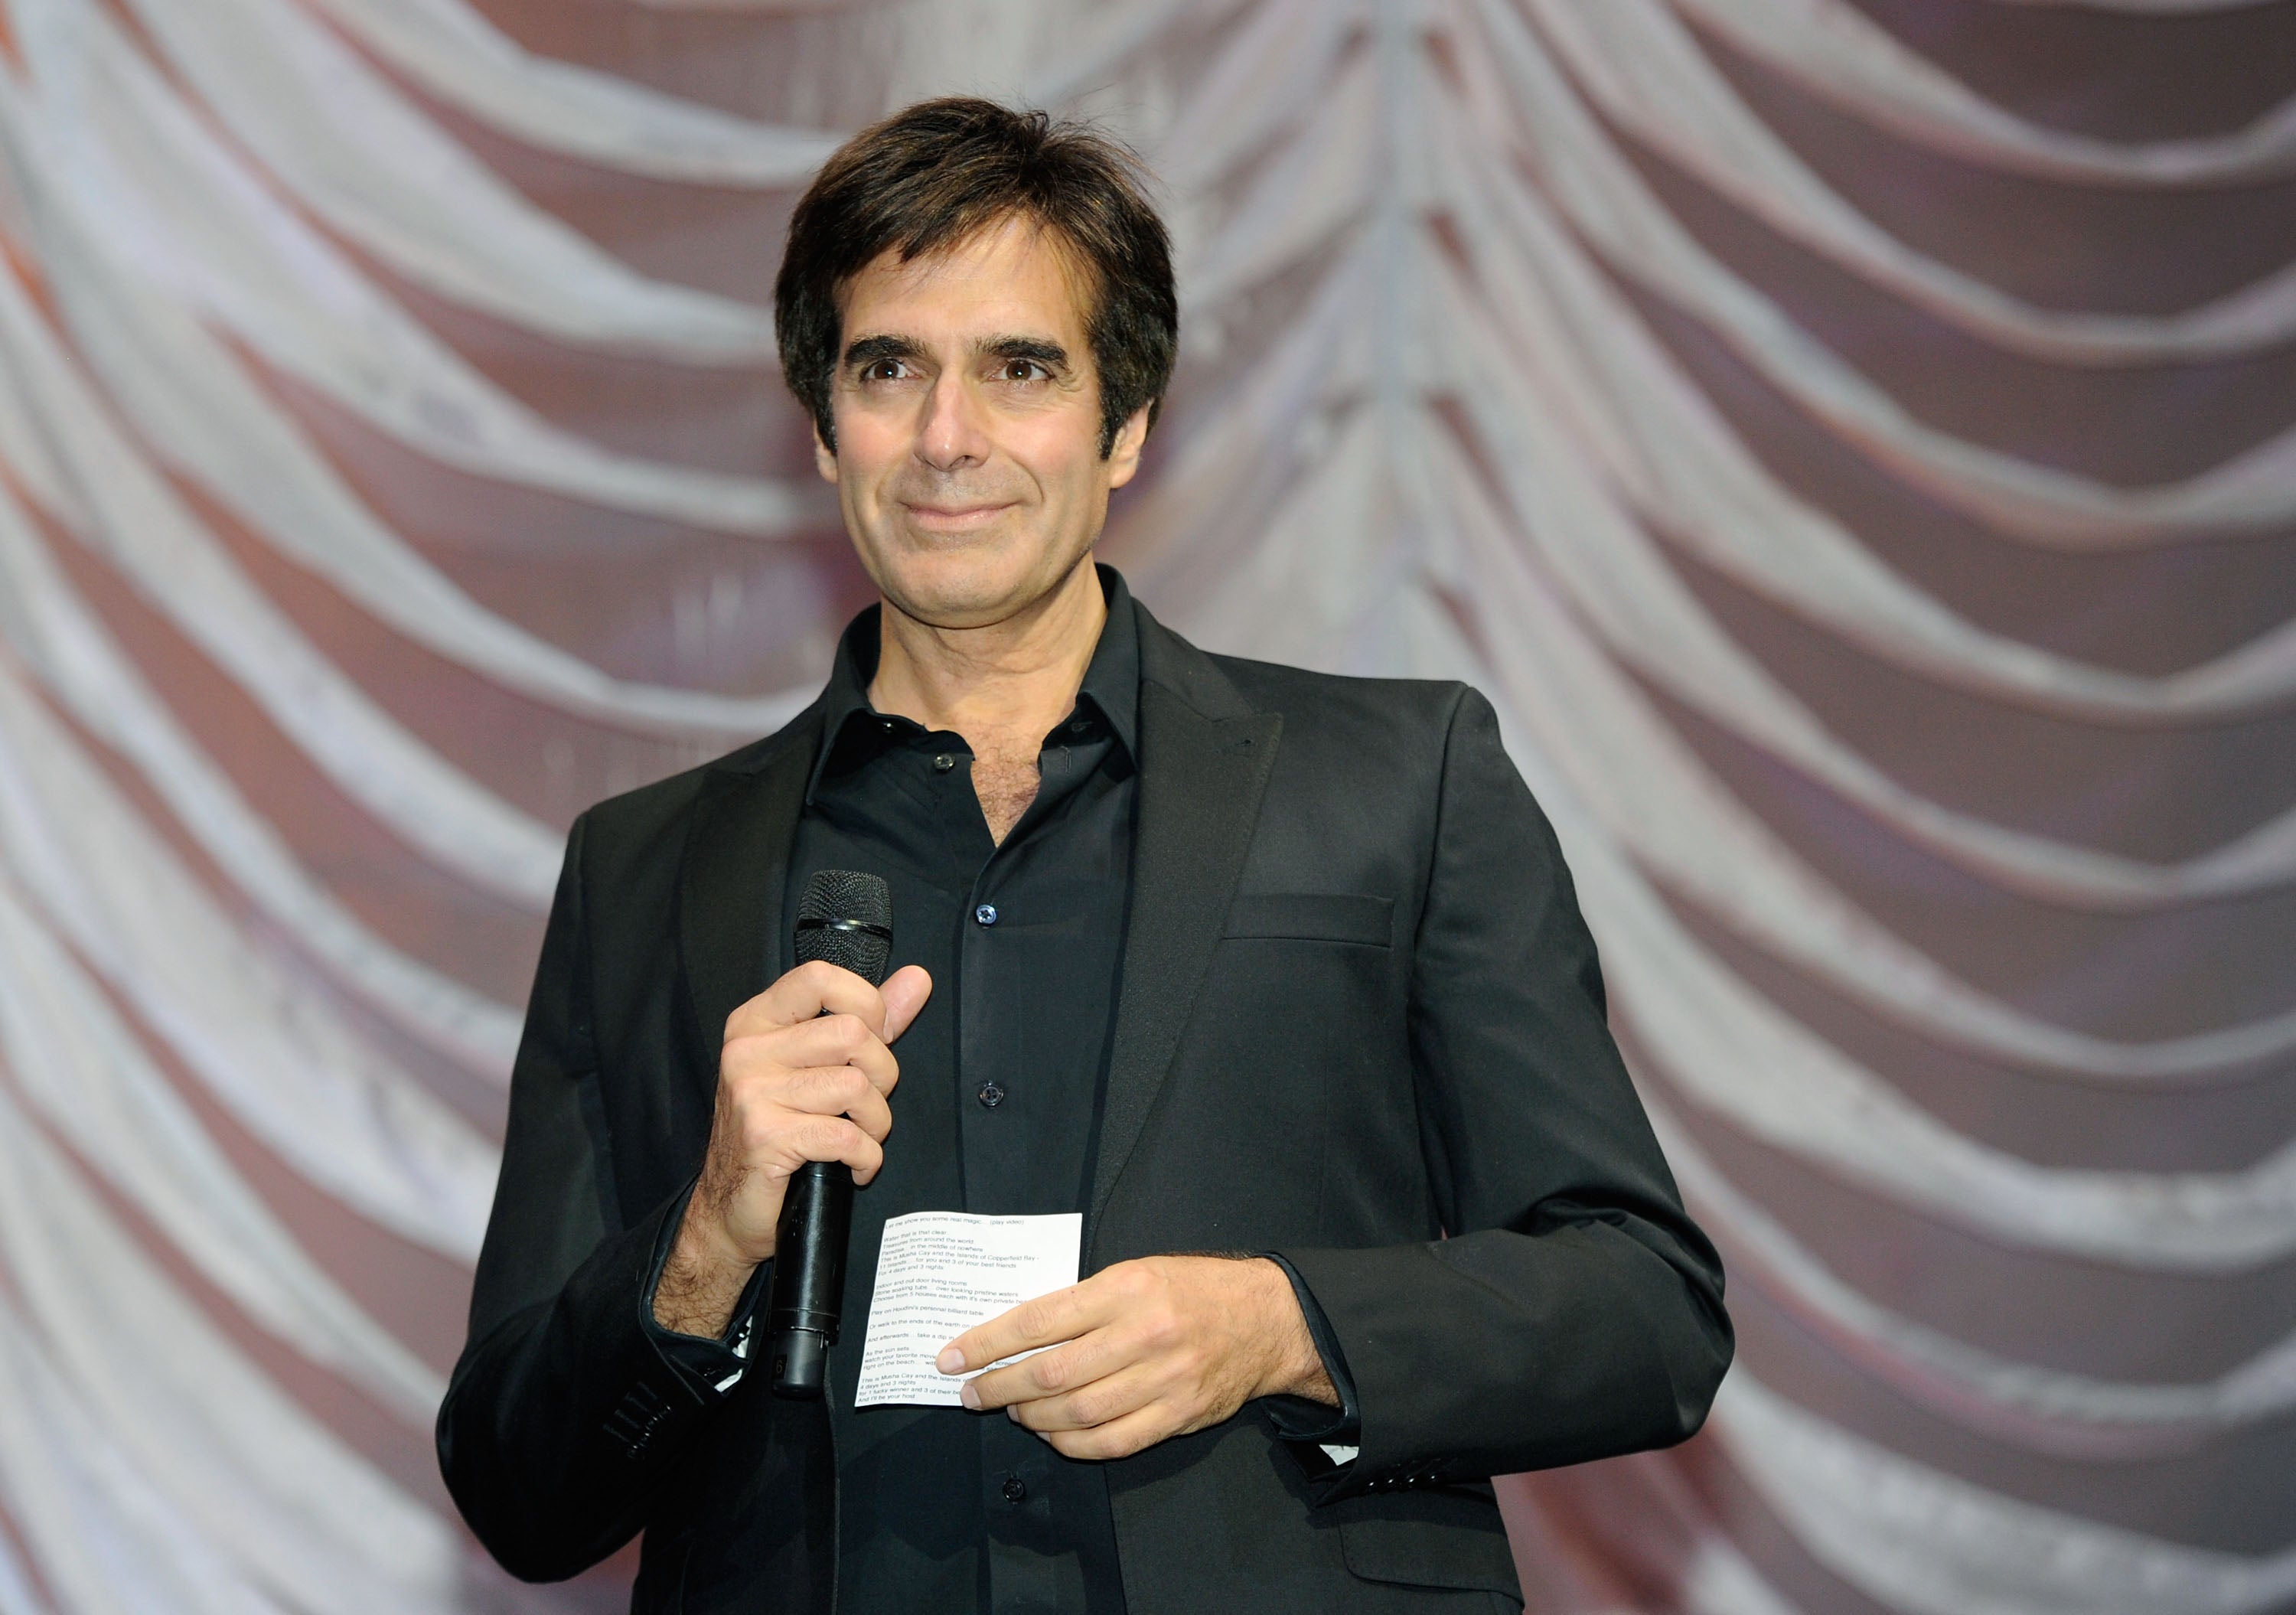 David Copperfield at the Keep Memory Alive foundation's "Power of Love Gala" celebrating Muhammad Ali's 70th birthday at the MGM Grand Garden Arena February 18, 2012 in Las Vegas, Nevada